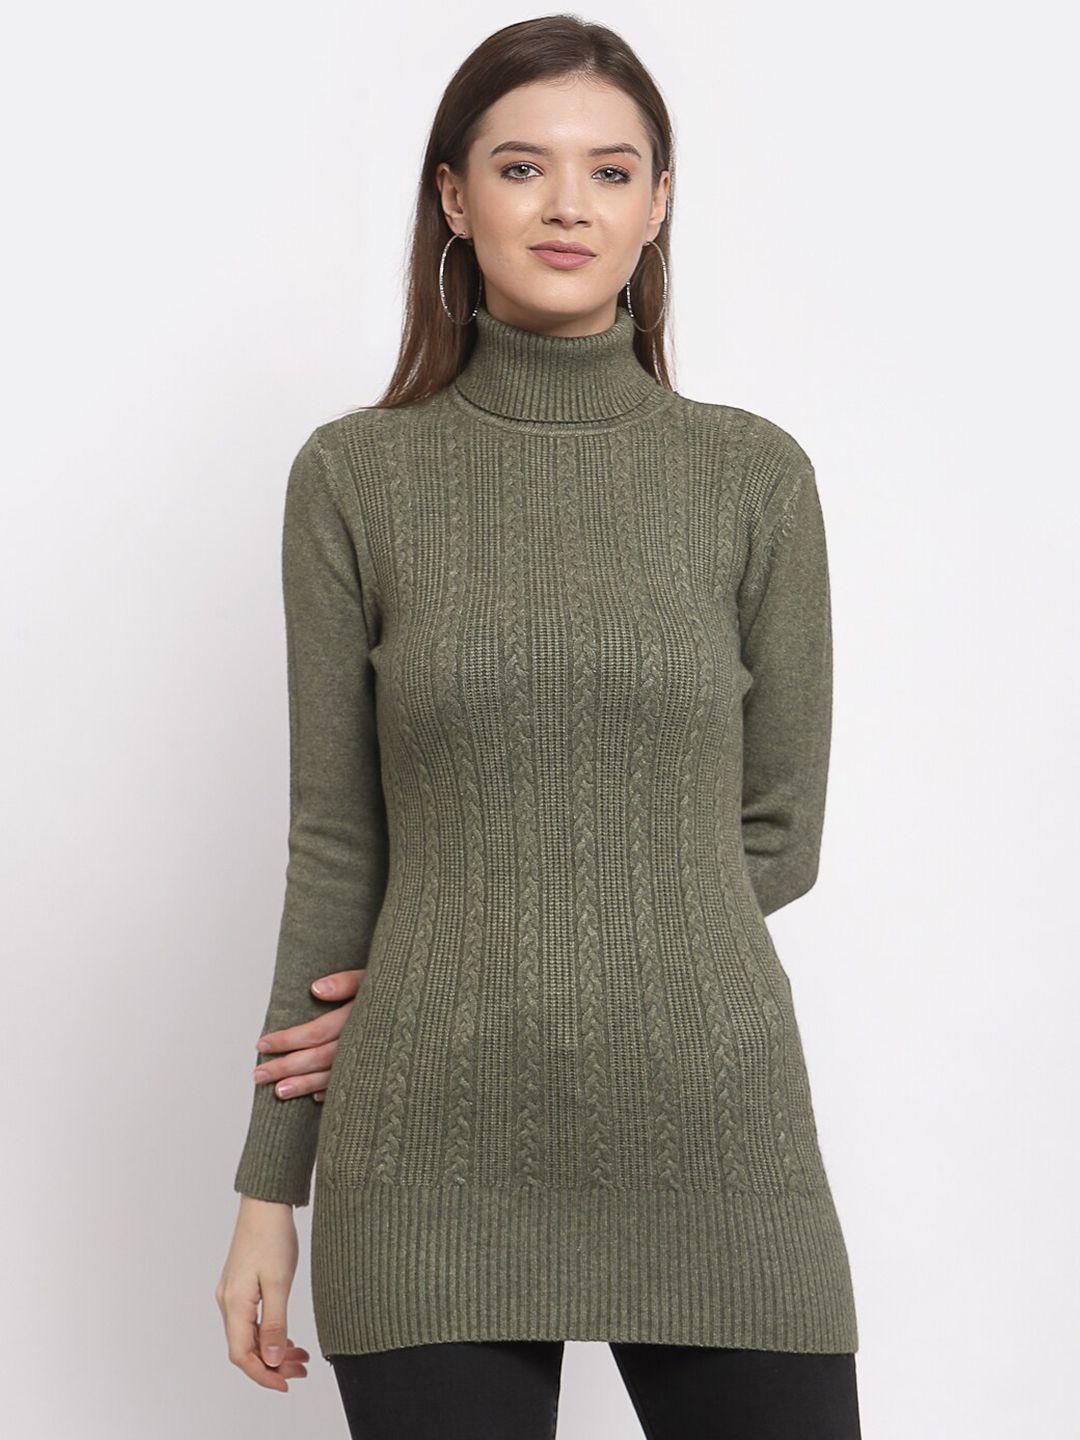 Mafadeny Women Green Turtle Neck Long Cable Knit Sweater